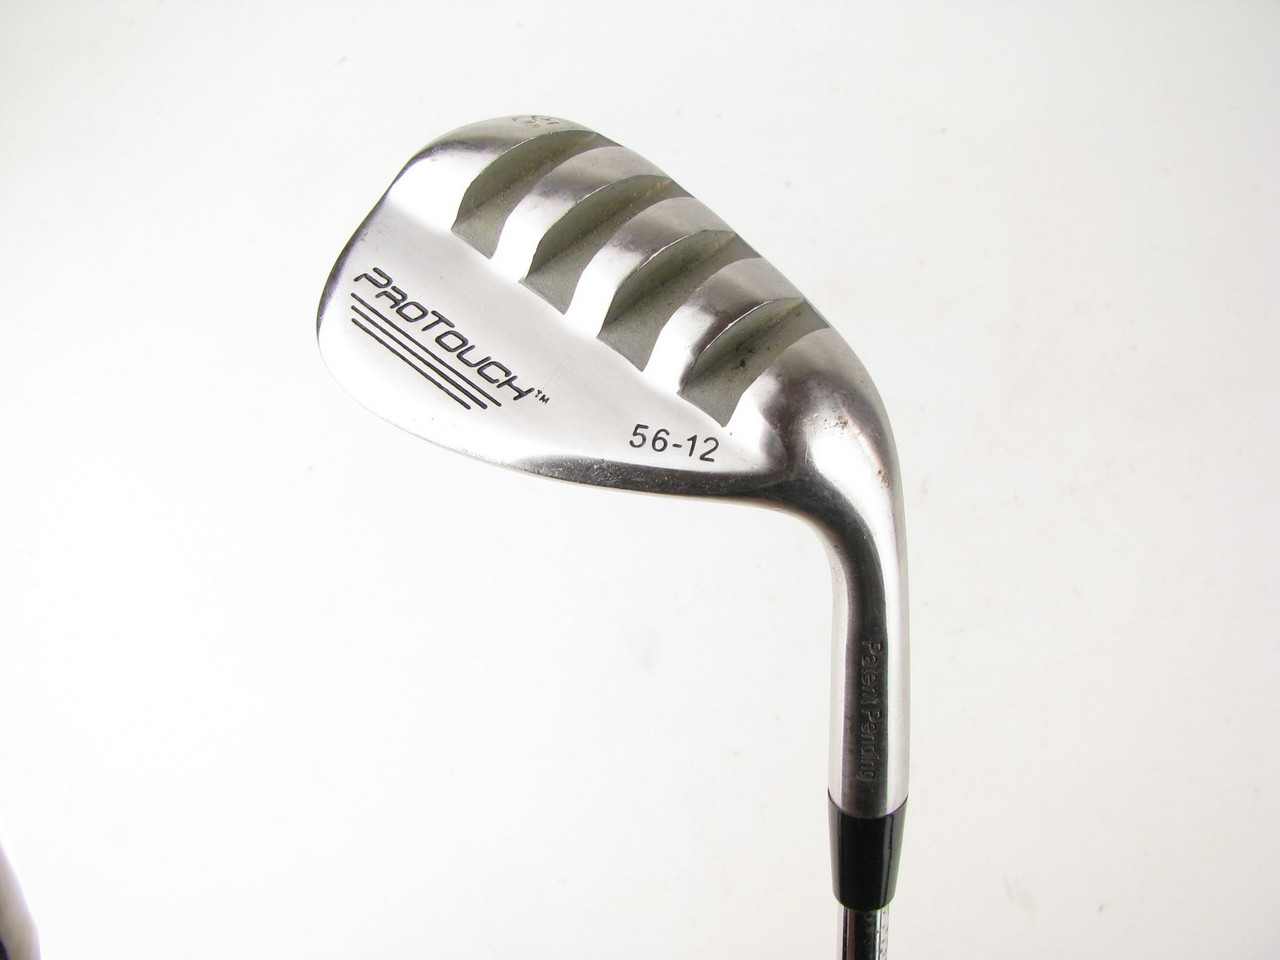 ProTouch M7 Sand Wedge 56 degree 56-12 Sole Channel (Out of Stock ...